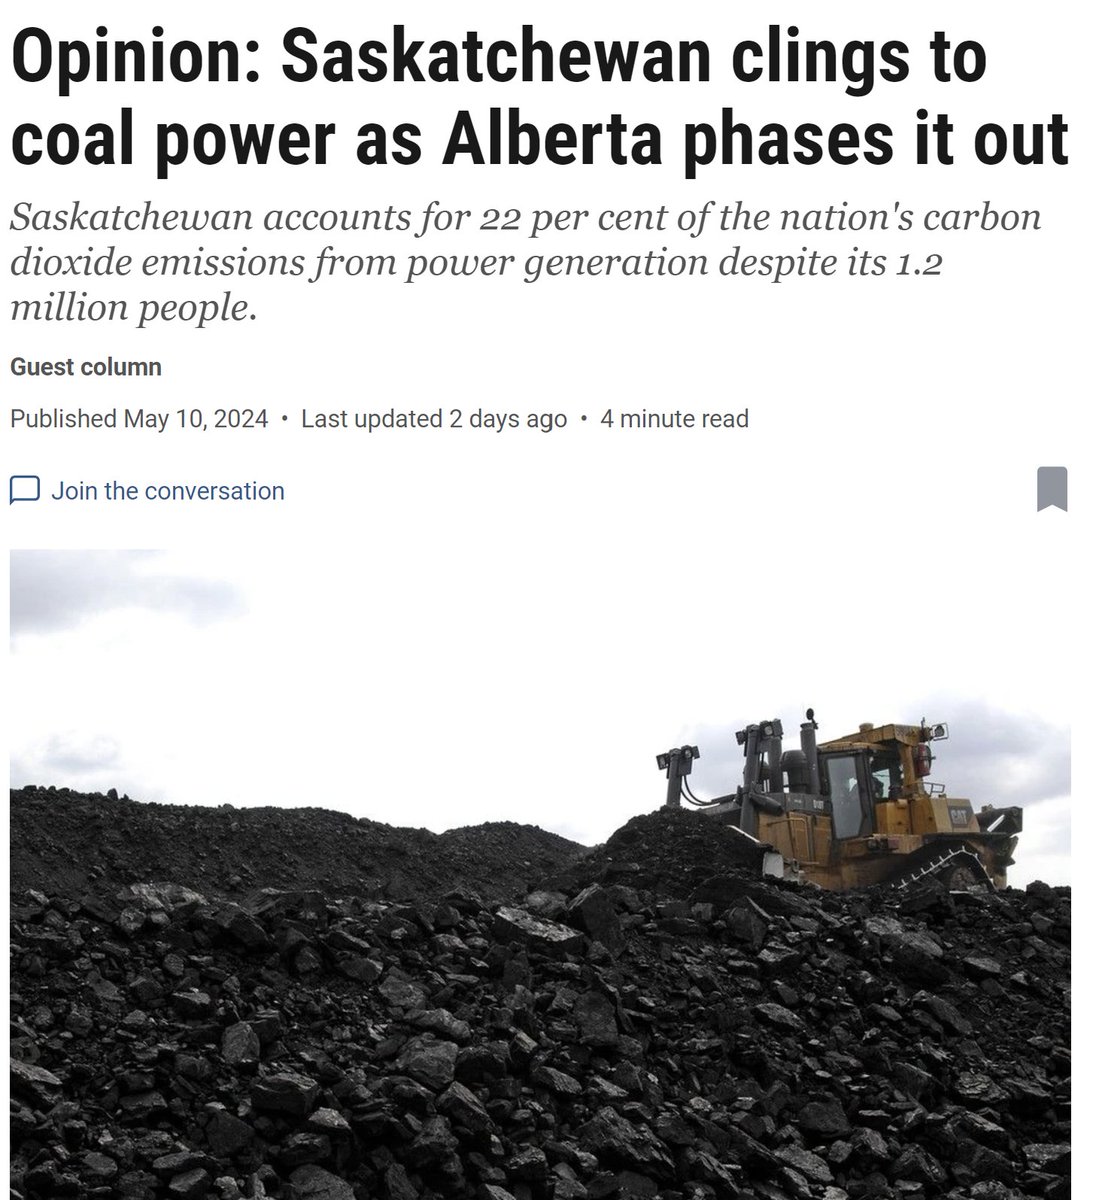 'We also hold the unfortunate distinction of having the highest per capita emissions in Canada. Sask’s per capita emission is 55.9 tonnes of CO2e, more than triple the national average of 17.7 t per capita' The Premier's friends and donors profit off the future of our kids.